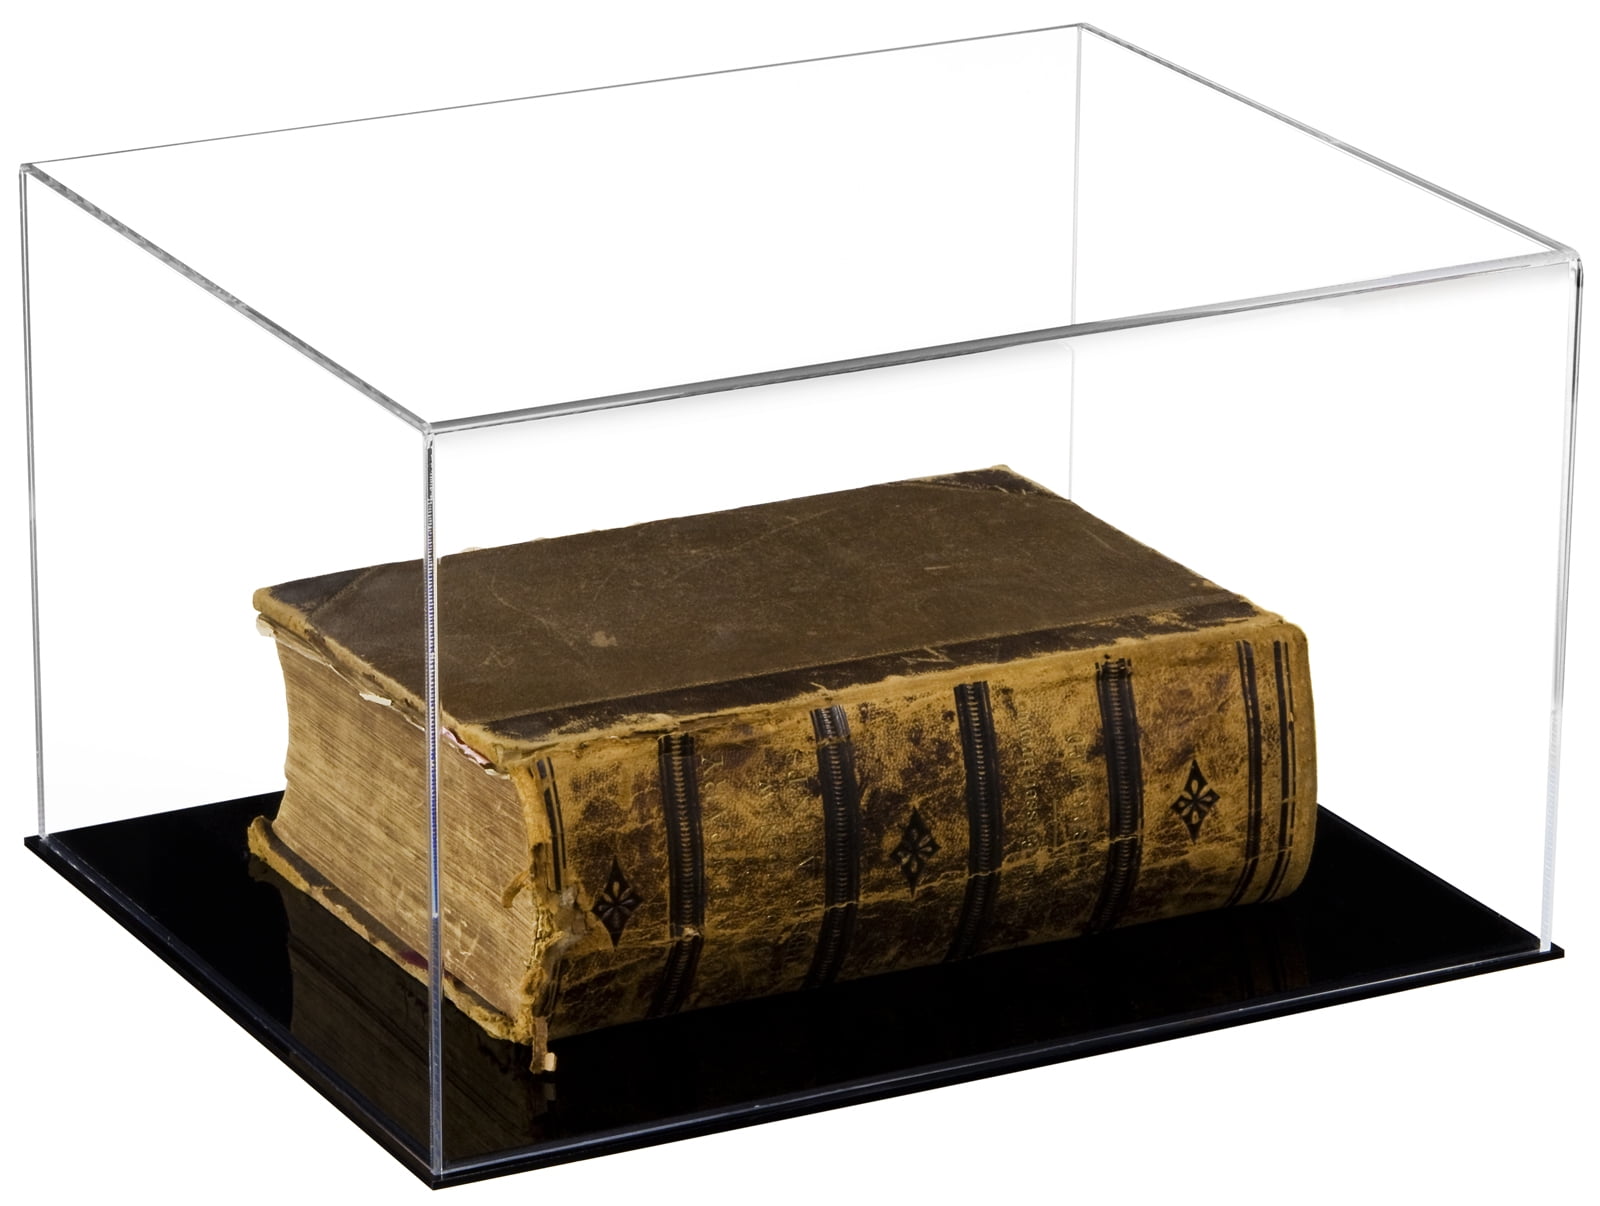 A084 Deluxe Clear Acrylic Table Top Display Case for Collectable Book 